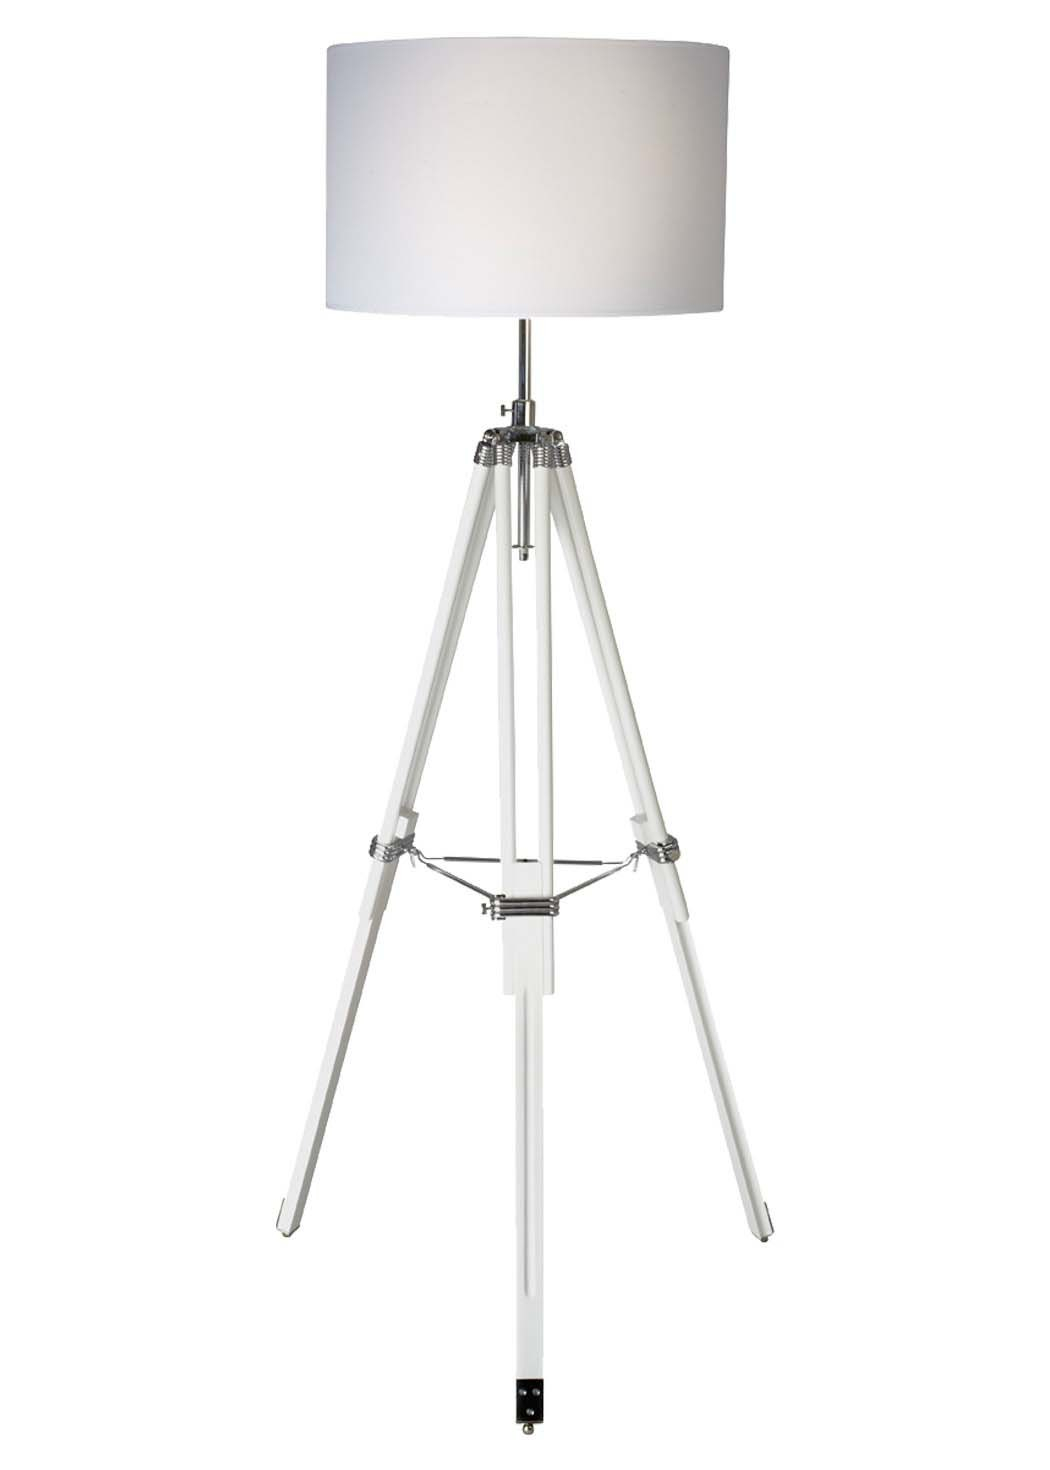 Lamps Dramatic Cb2 Arc Lamp For Home Ideas Lvivairport in sizing 1050 X 1470